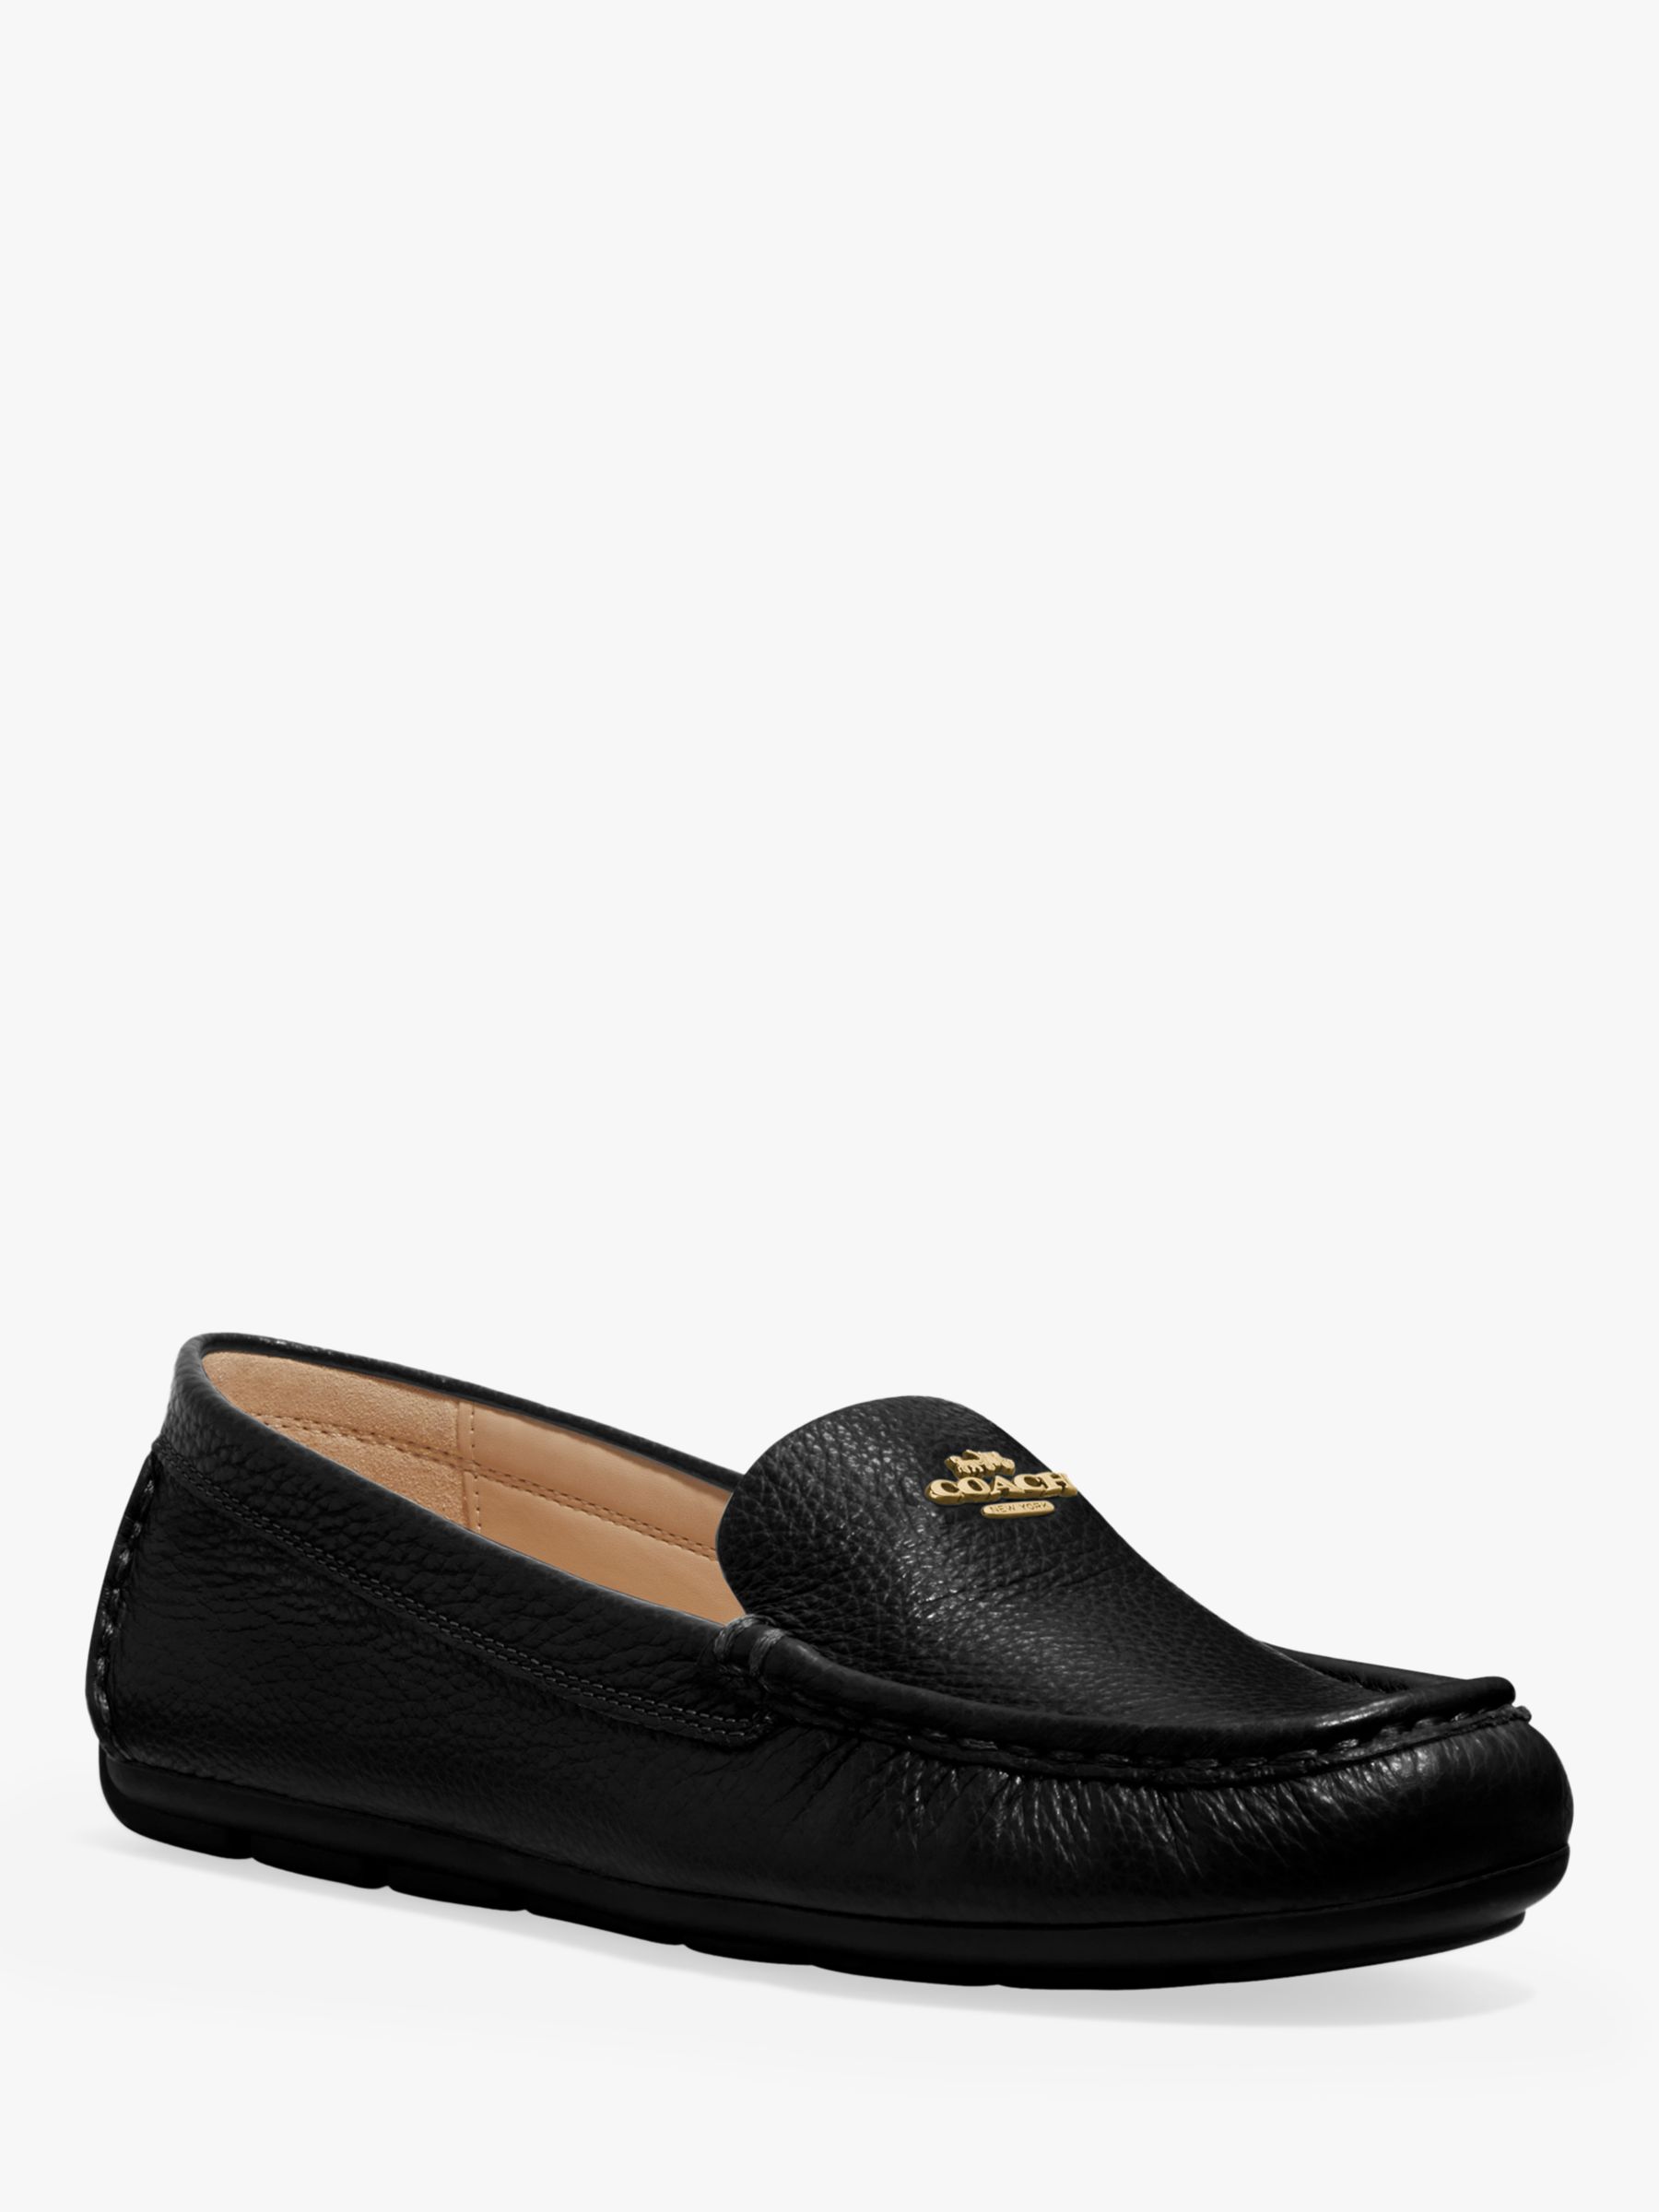 Coach Marley Driver Leather Loafers, Black at John Lewis & Partners